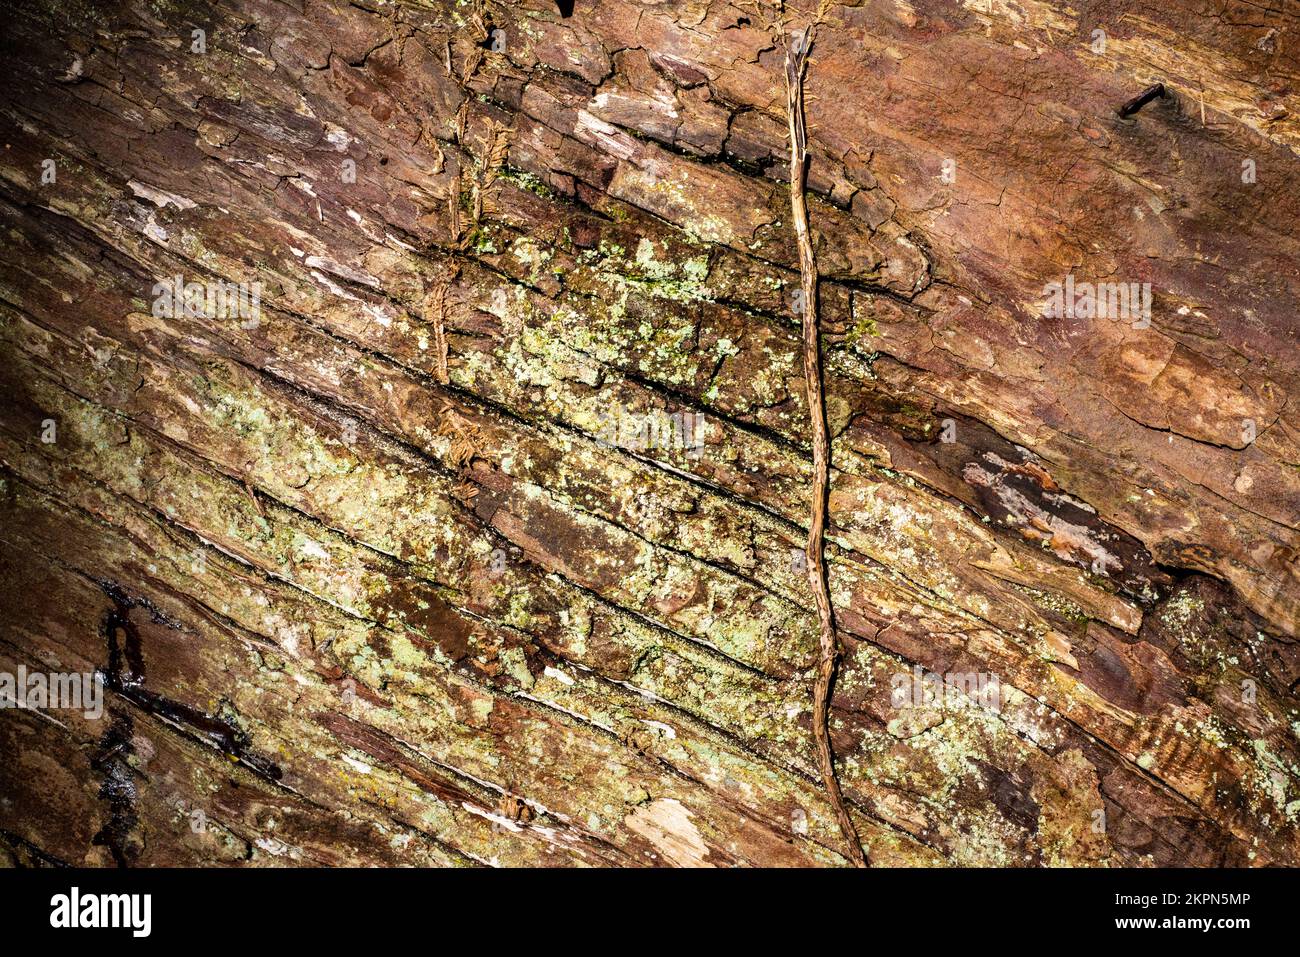 Bark of a tree with texture and details Stock Photo